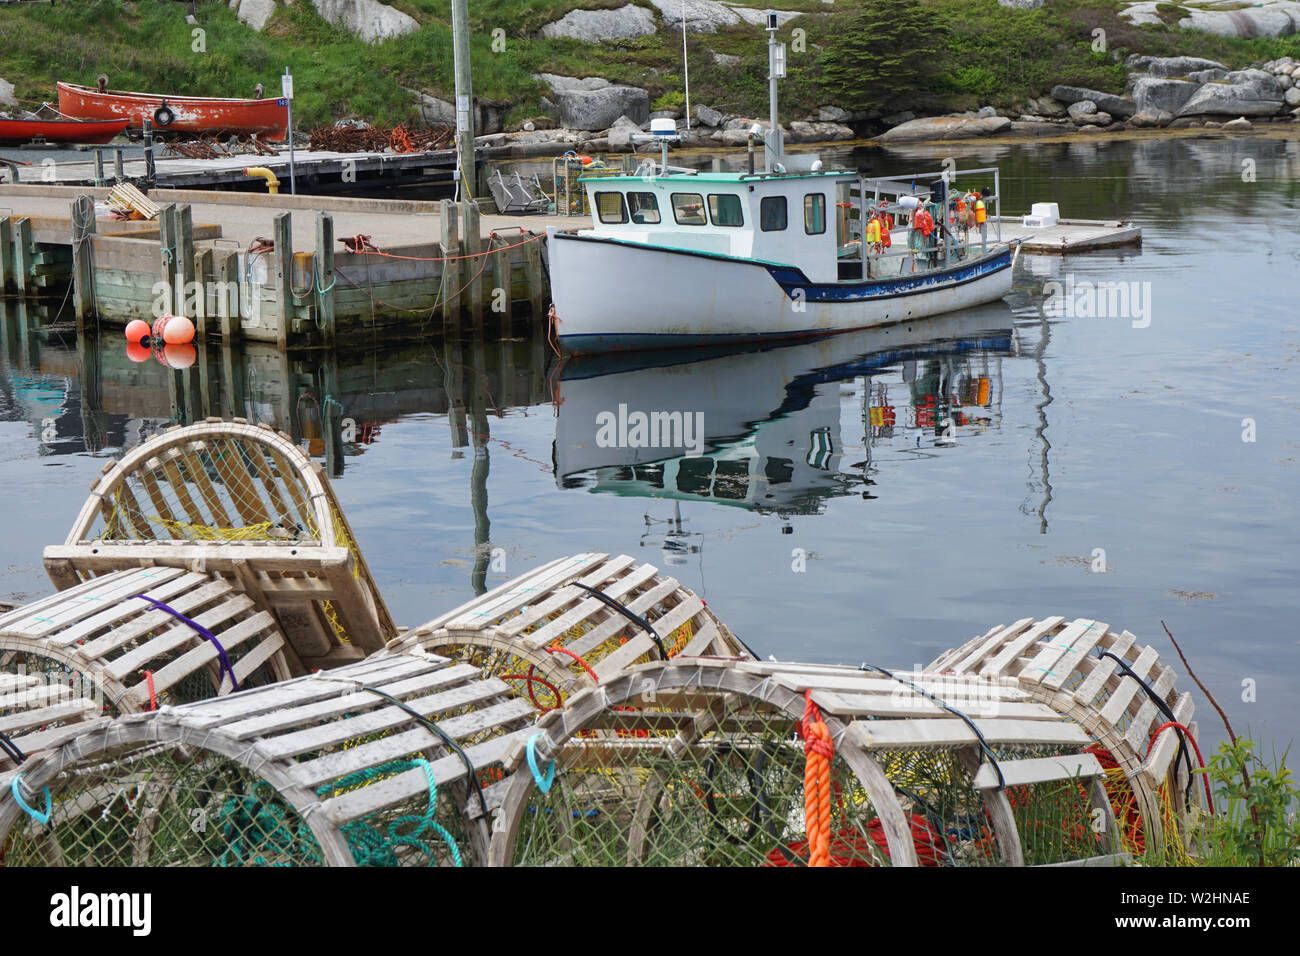 Wooden lobster traps and a fishing boat in Peggy's Cove, Nova Scotia Stock Photo